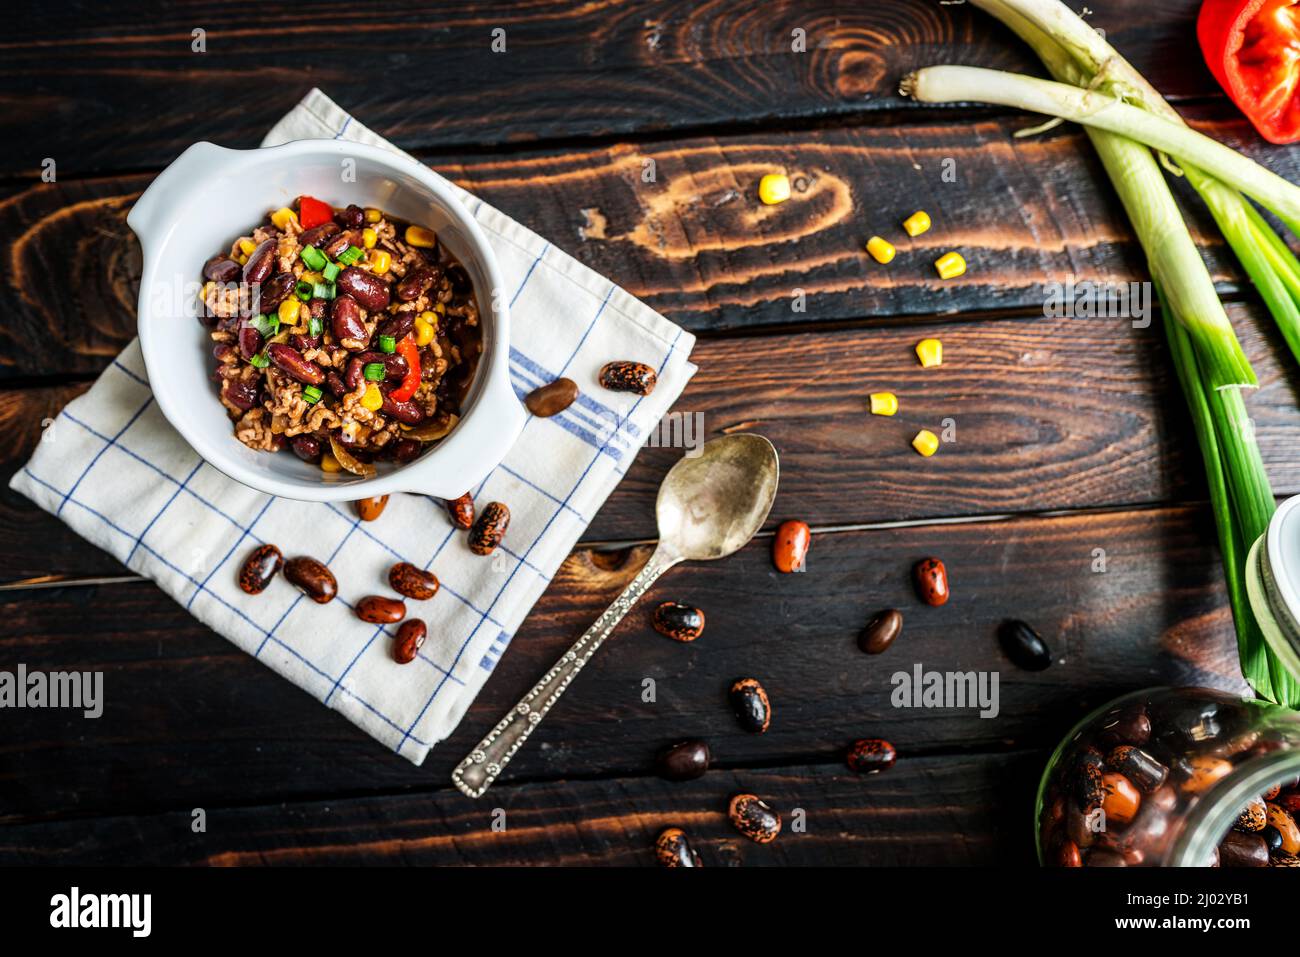 Mexican chili or chilli con carne. Cooked kidney bean, minced meat, chili, corn and pepper in pan  on wood table Stock Photo